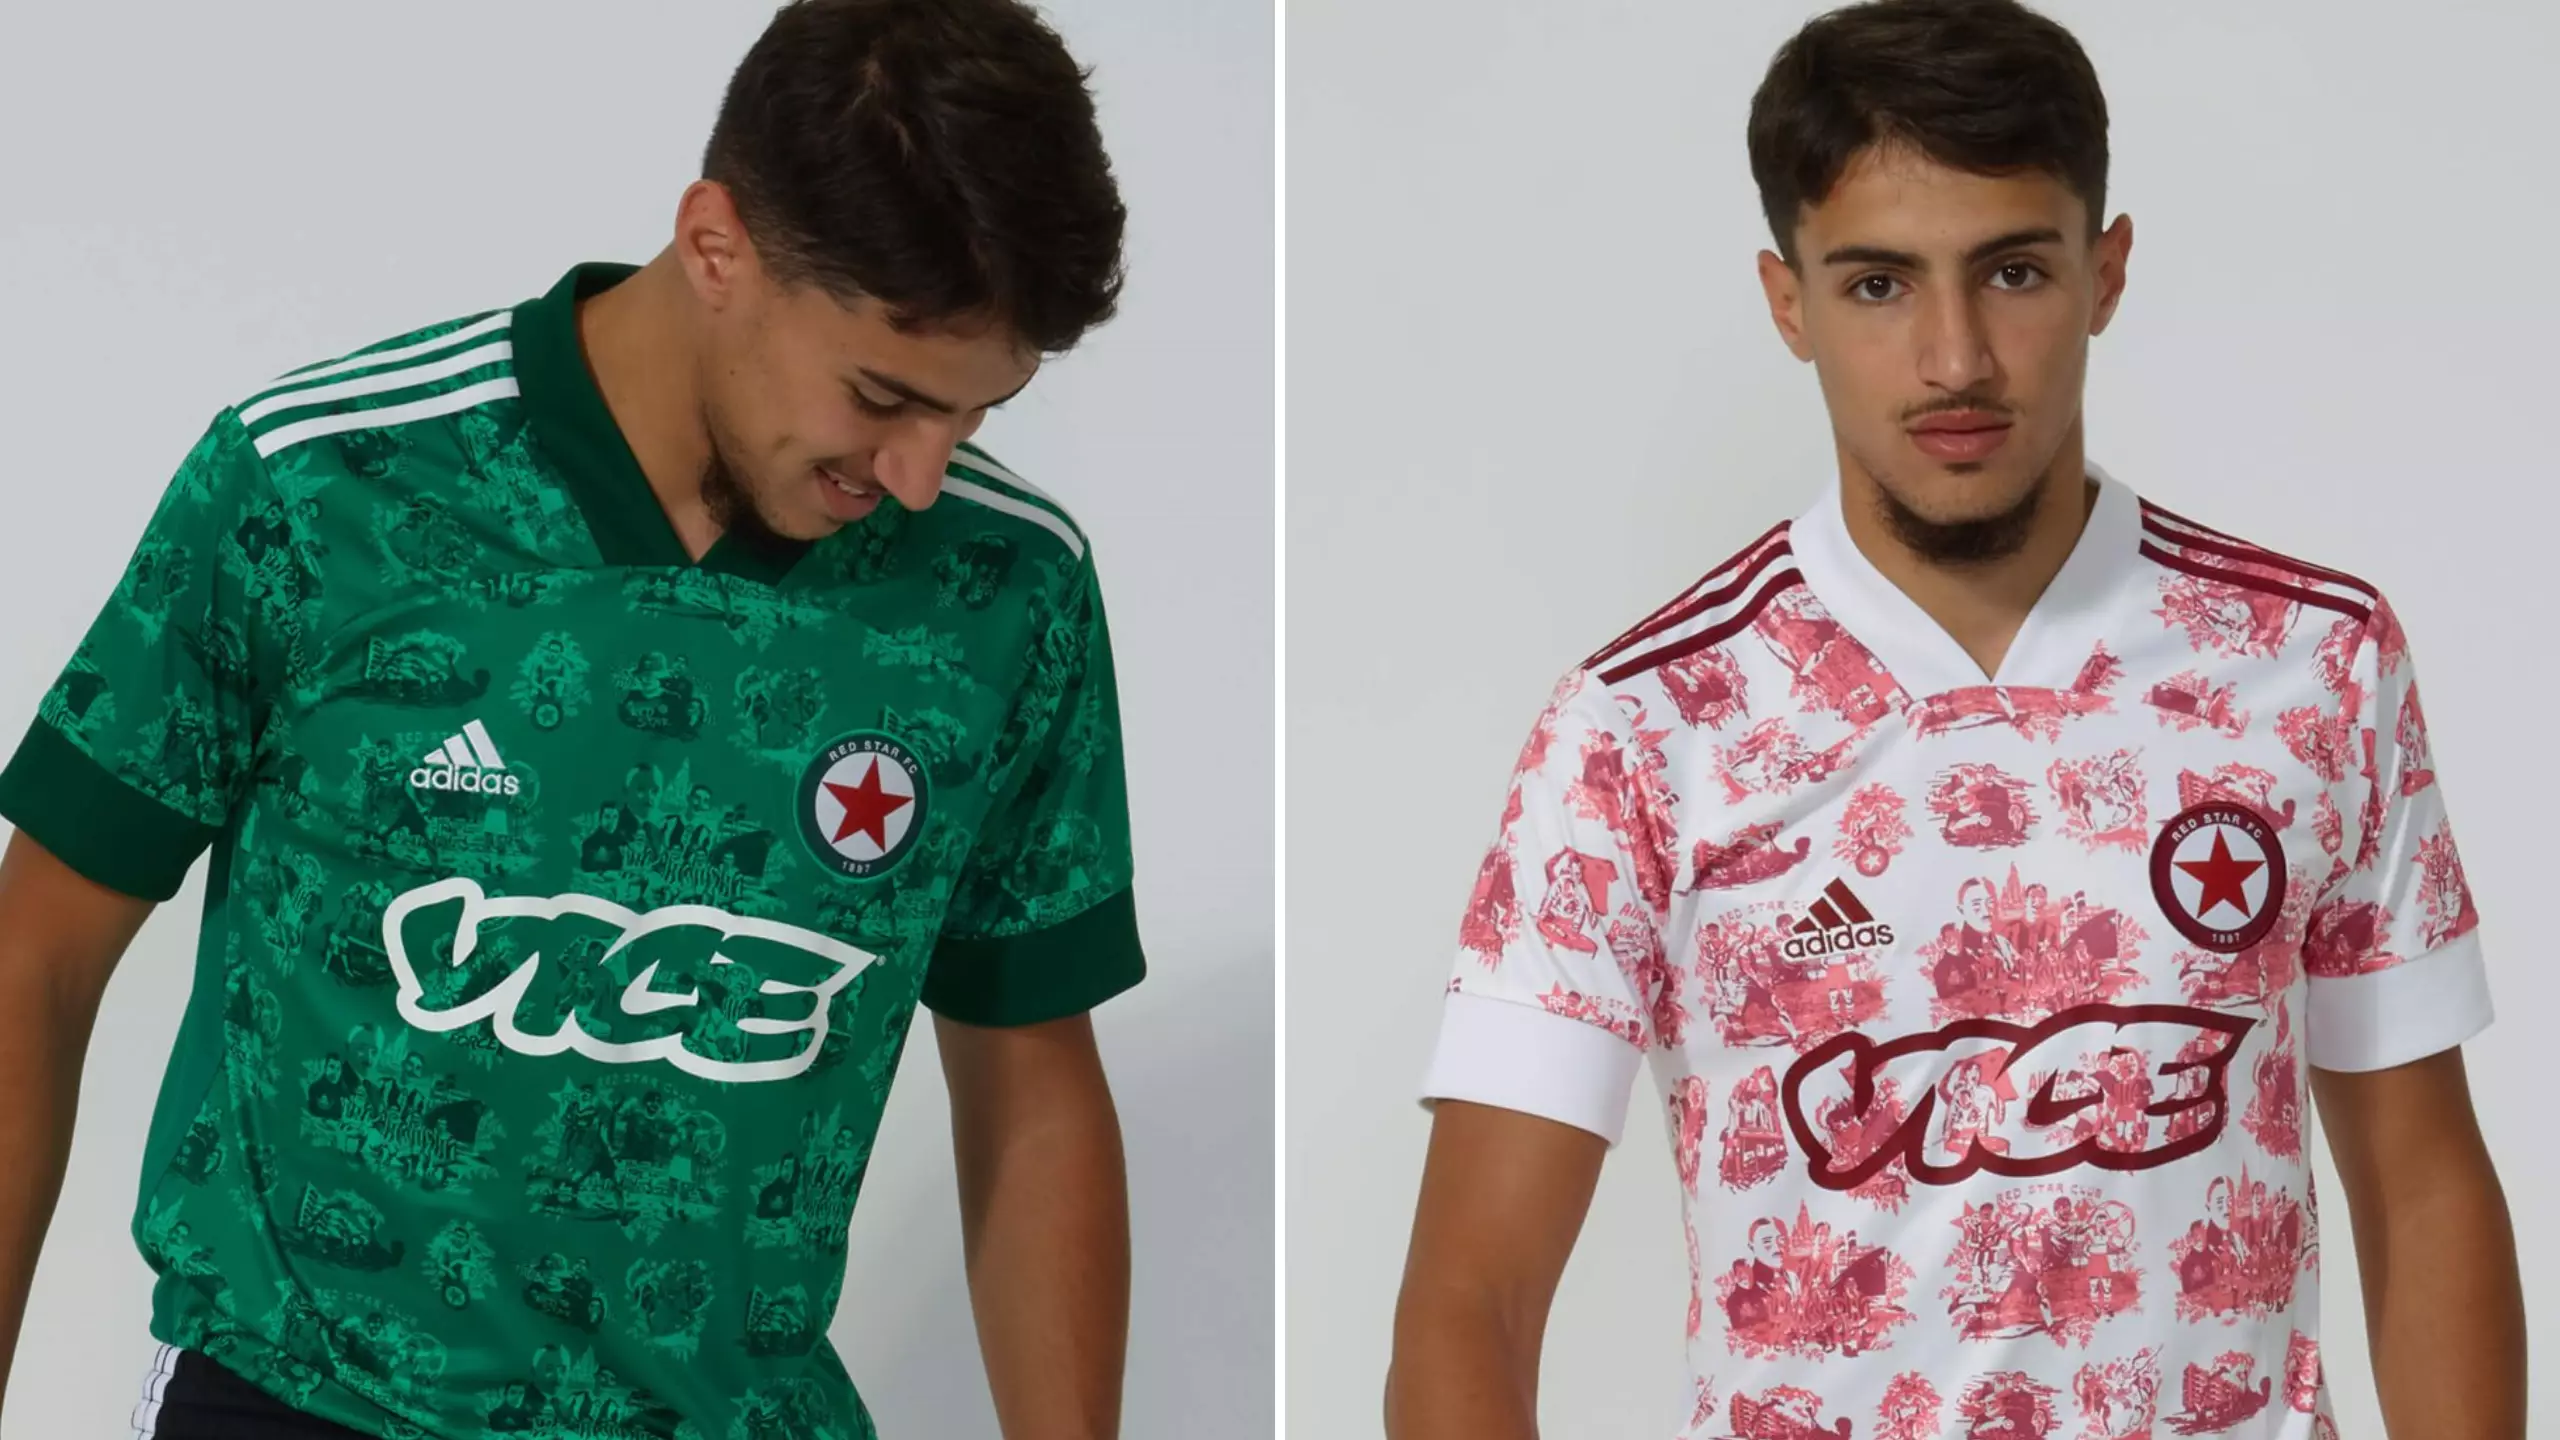 Red Star FC May Have Dropped The Best Home And Away Kits Of 2020